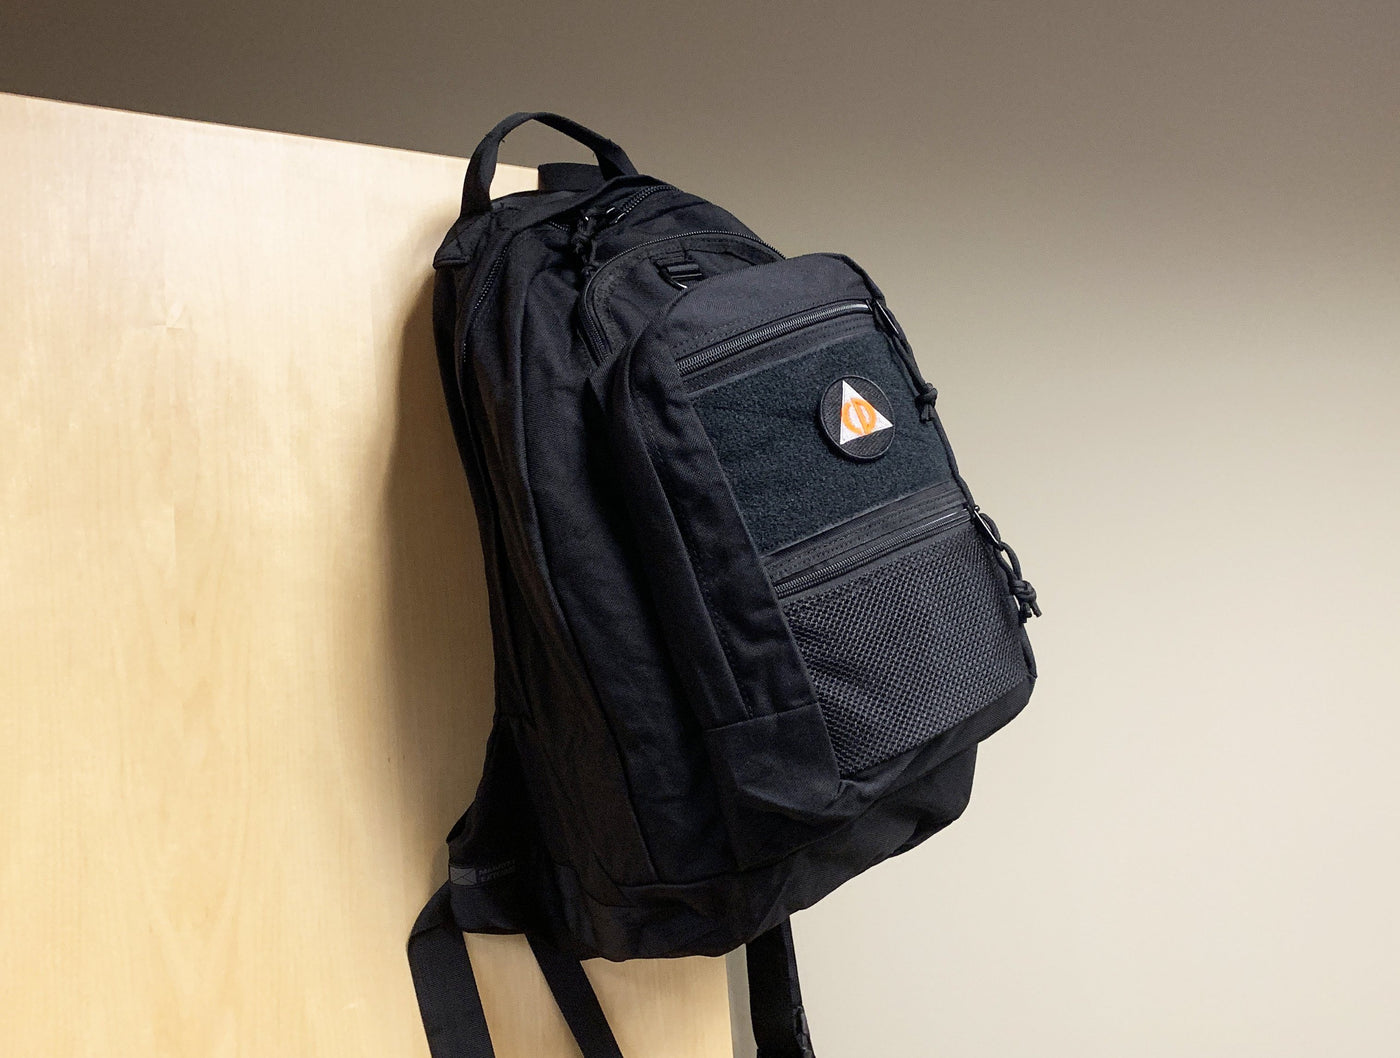 Urban Day Backpack By Maratac - CountyComm